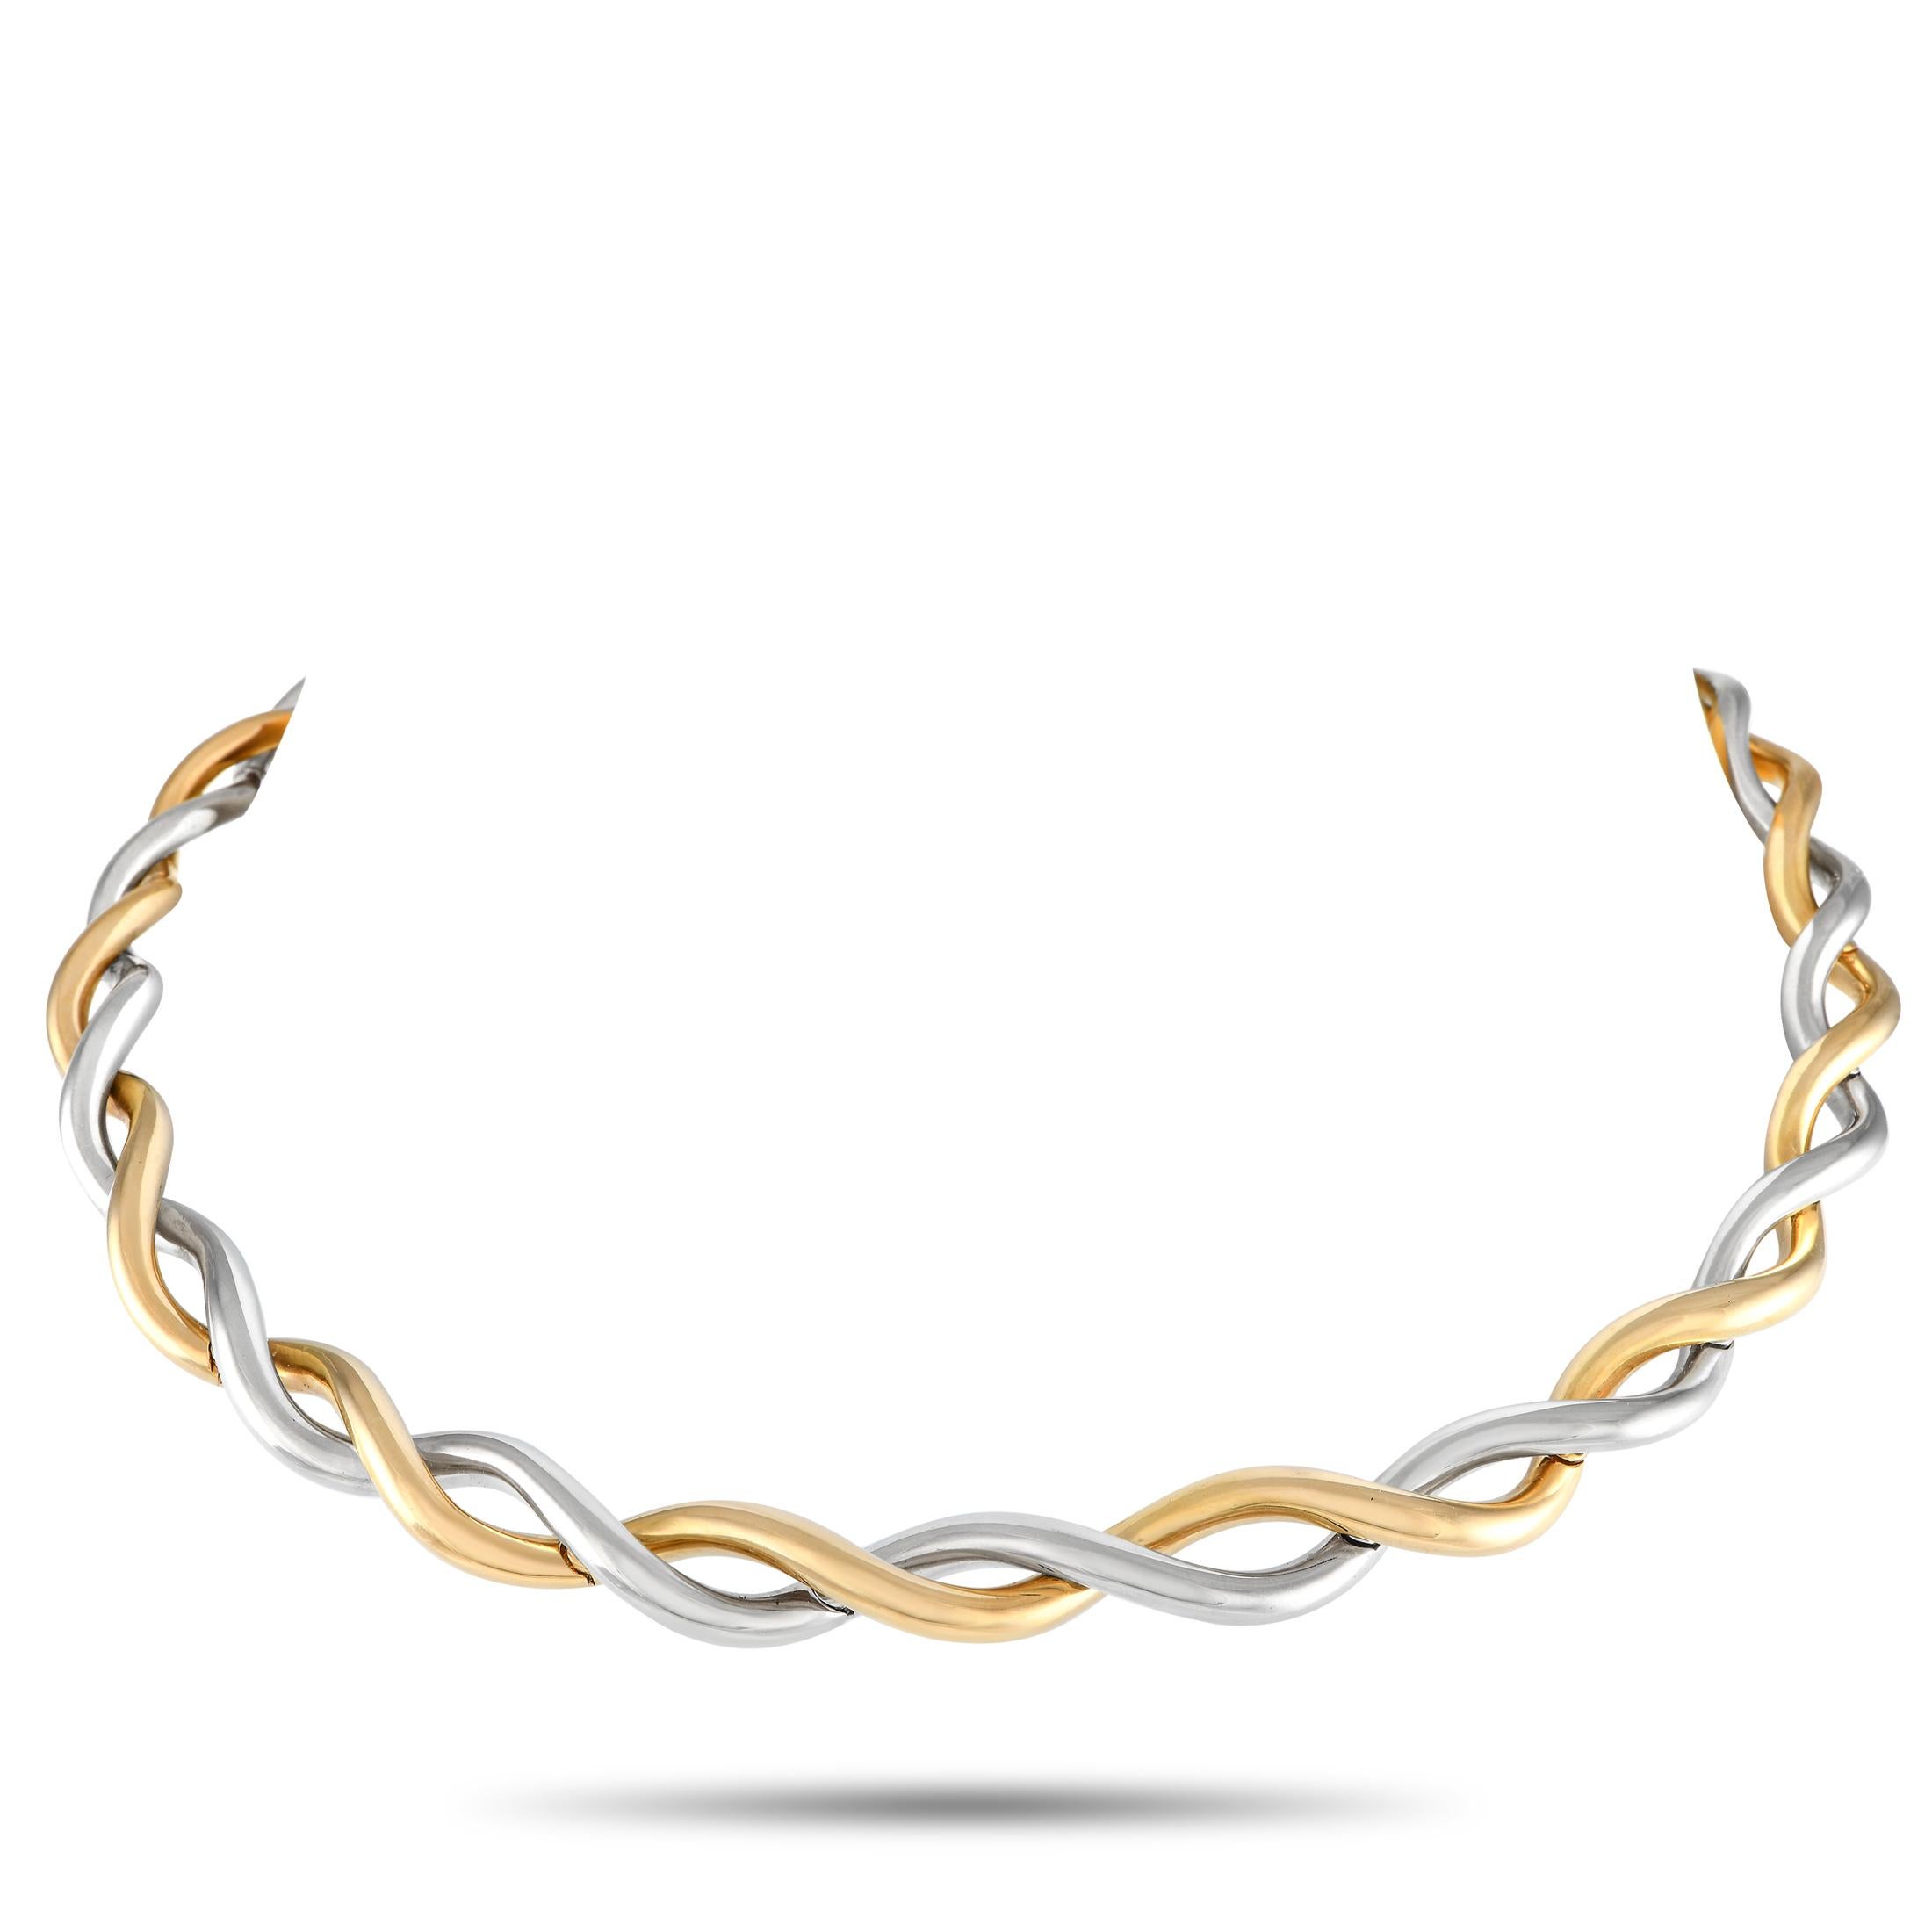 Van Cleef & Arpels 18K Yellow and White Gold Two-Tone Twisted Choker Necklace  In Excellent Condition For Sale In Southampton, PA